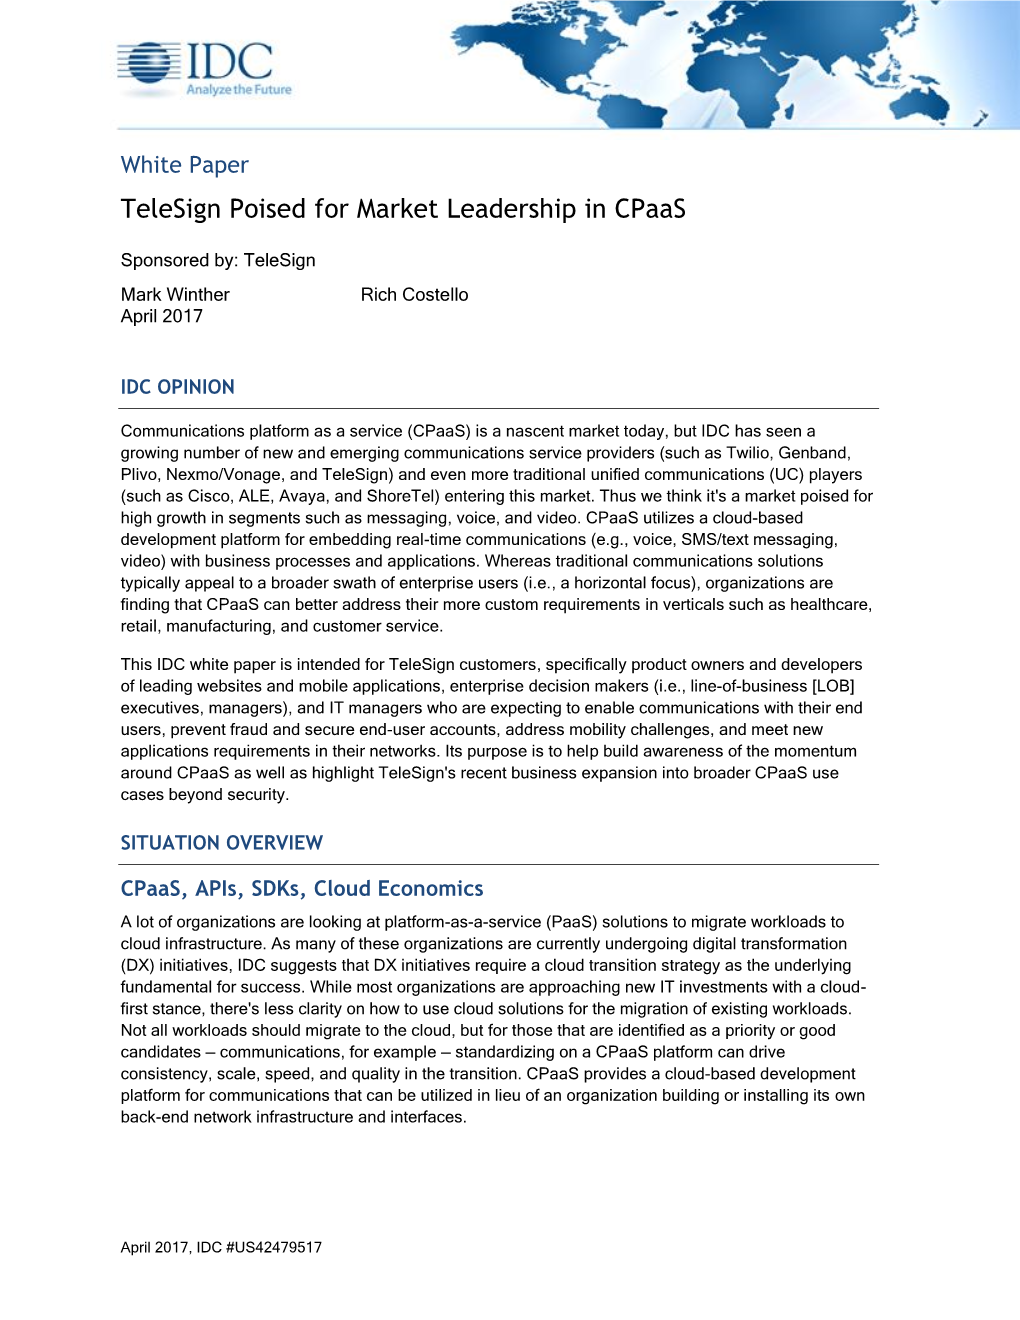 IDC White Paper – “Telesign Poised for Market Leadership in Cpaas”